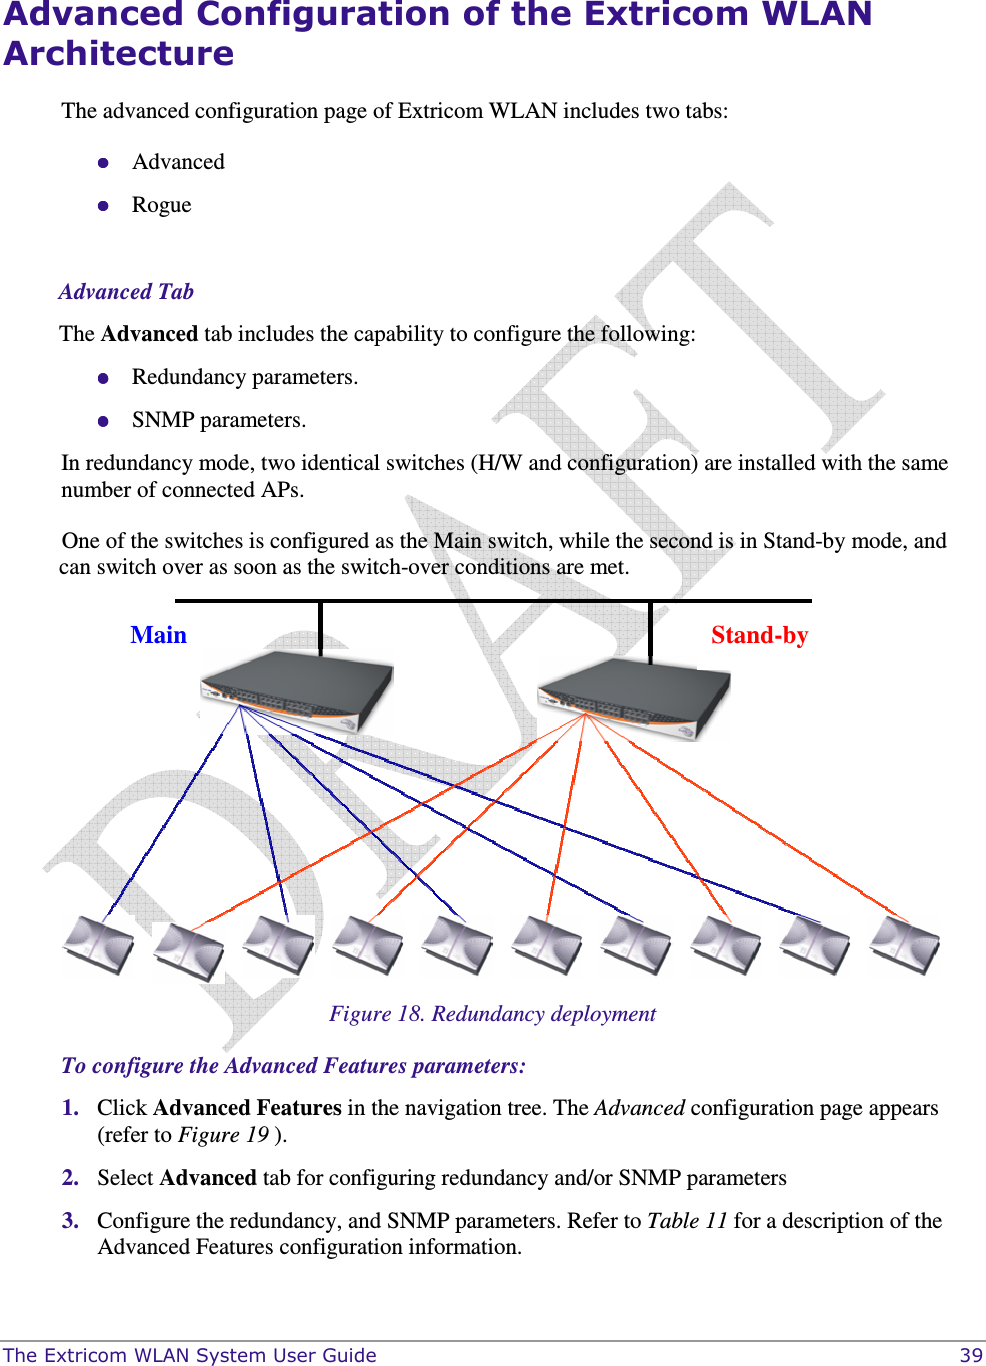  The Extricom WLAN System User Guide    39 Advanced Configuration of the Extricom WLAN Architecture The advanced configuration page of Extricom WLAN includes two tabs:  Advanced  Rogue  Advanced Tab The Advanced tab includes the capability to configure the following:  Redundancy parameters.  SNMP parameters. In redundancy mode, two identical switches (H/W and configuration) are installed with the same number of connected APs.  One of the switches is configured as the Main switch, while the second is in Stand-by mode, and can switch over as soon as the switch-over conditions are met.   Figure 18. Redundancy deployment To configure the Advanced Features parameters: 1. Click Advanced Features in the navigation tree. The Advanced configuration page appears (refer to Figure 19 ). 2. Select Advanced tab for configuring redundancy and/or SNMP parameters 3. Configure the redundancy, and SNMP parameters. Refer to Table 11 for a description of the Advanced Features configuration information.  Main  Stand-by 